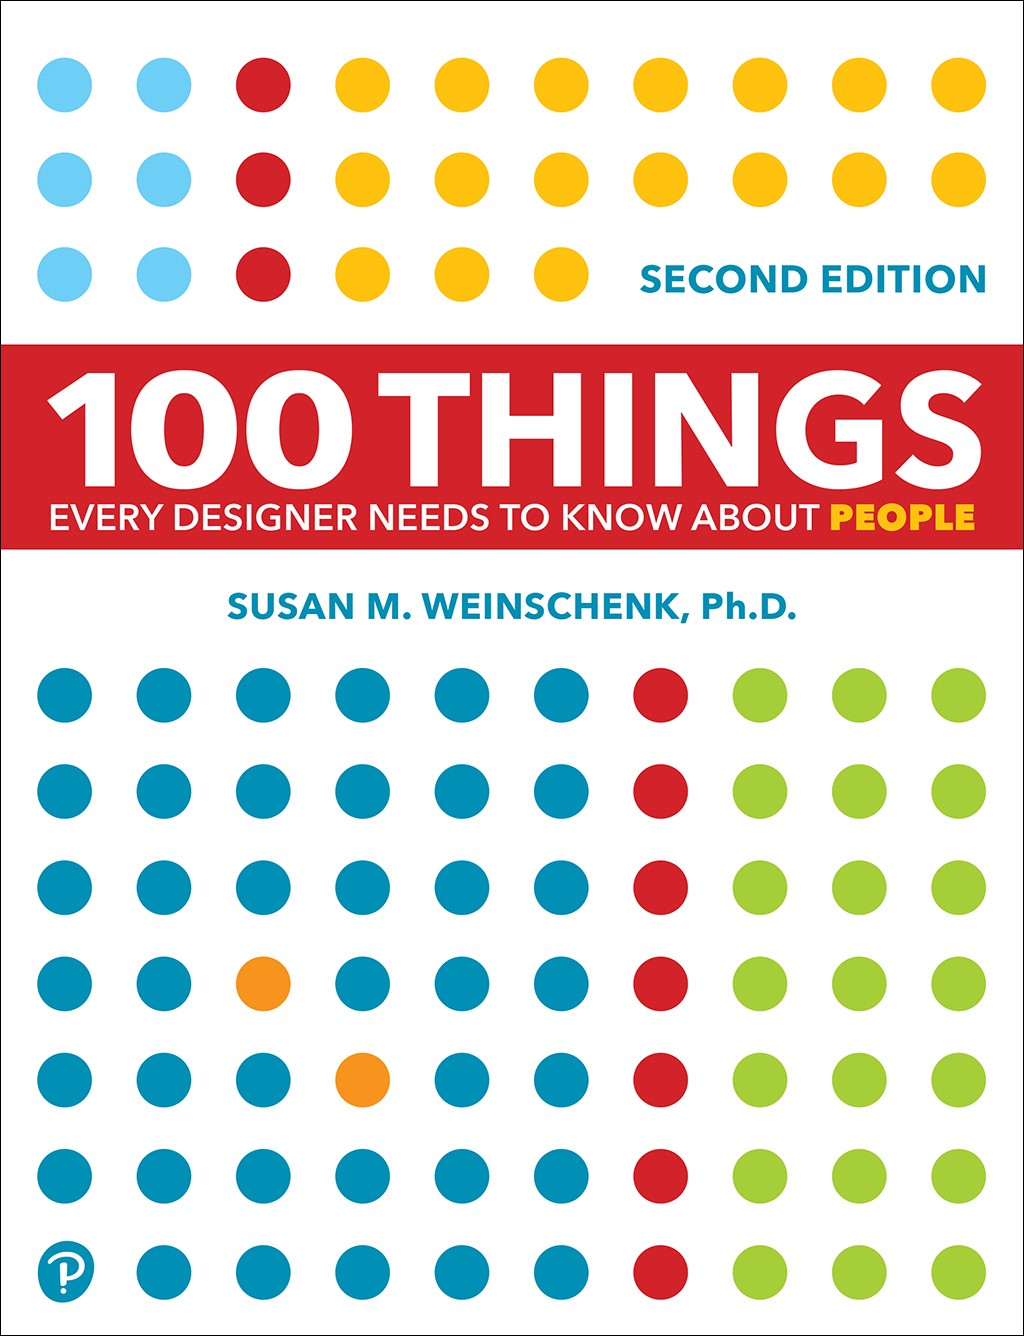 2nd Edition of 100 Things Book